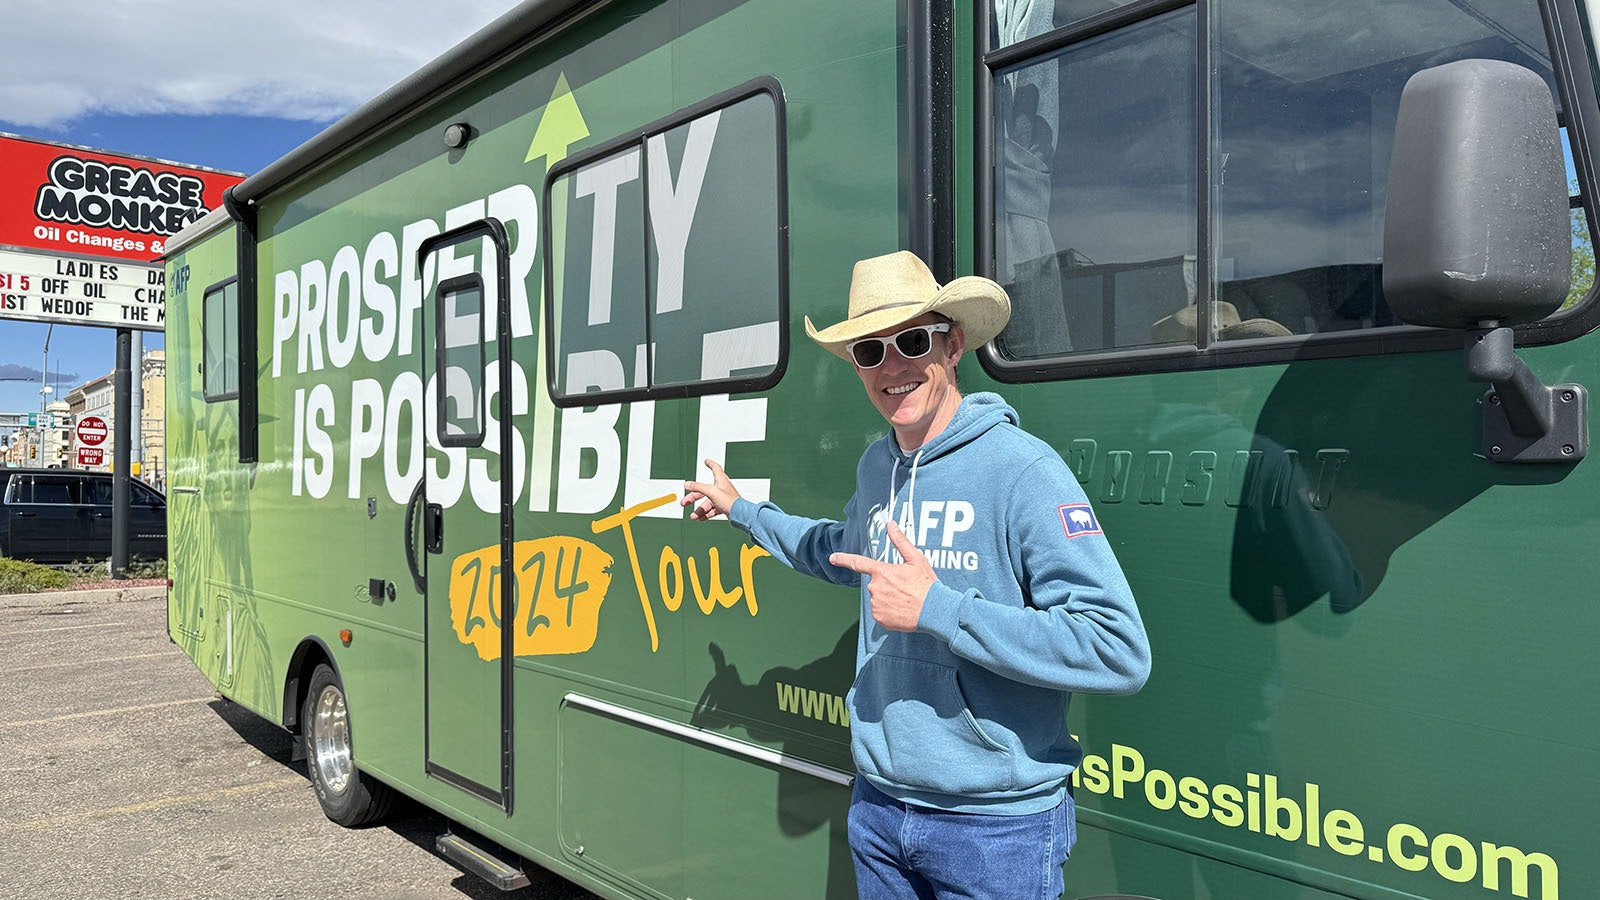 Tyler Lindholm, director of the Wyoming chapter of Americans for Prosperity, a conservative activist group, working to fight the Biden administration’s economic policies, at Hi Market in Cheyenne.